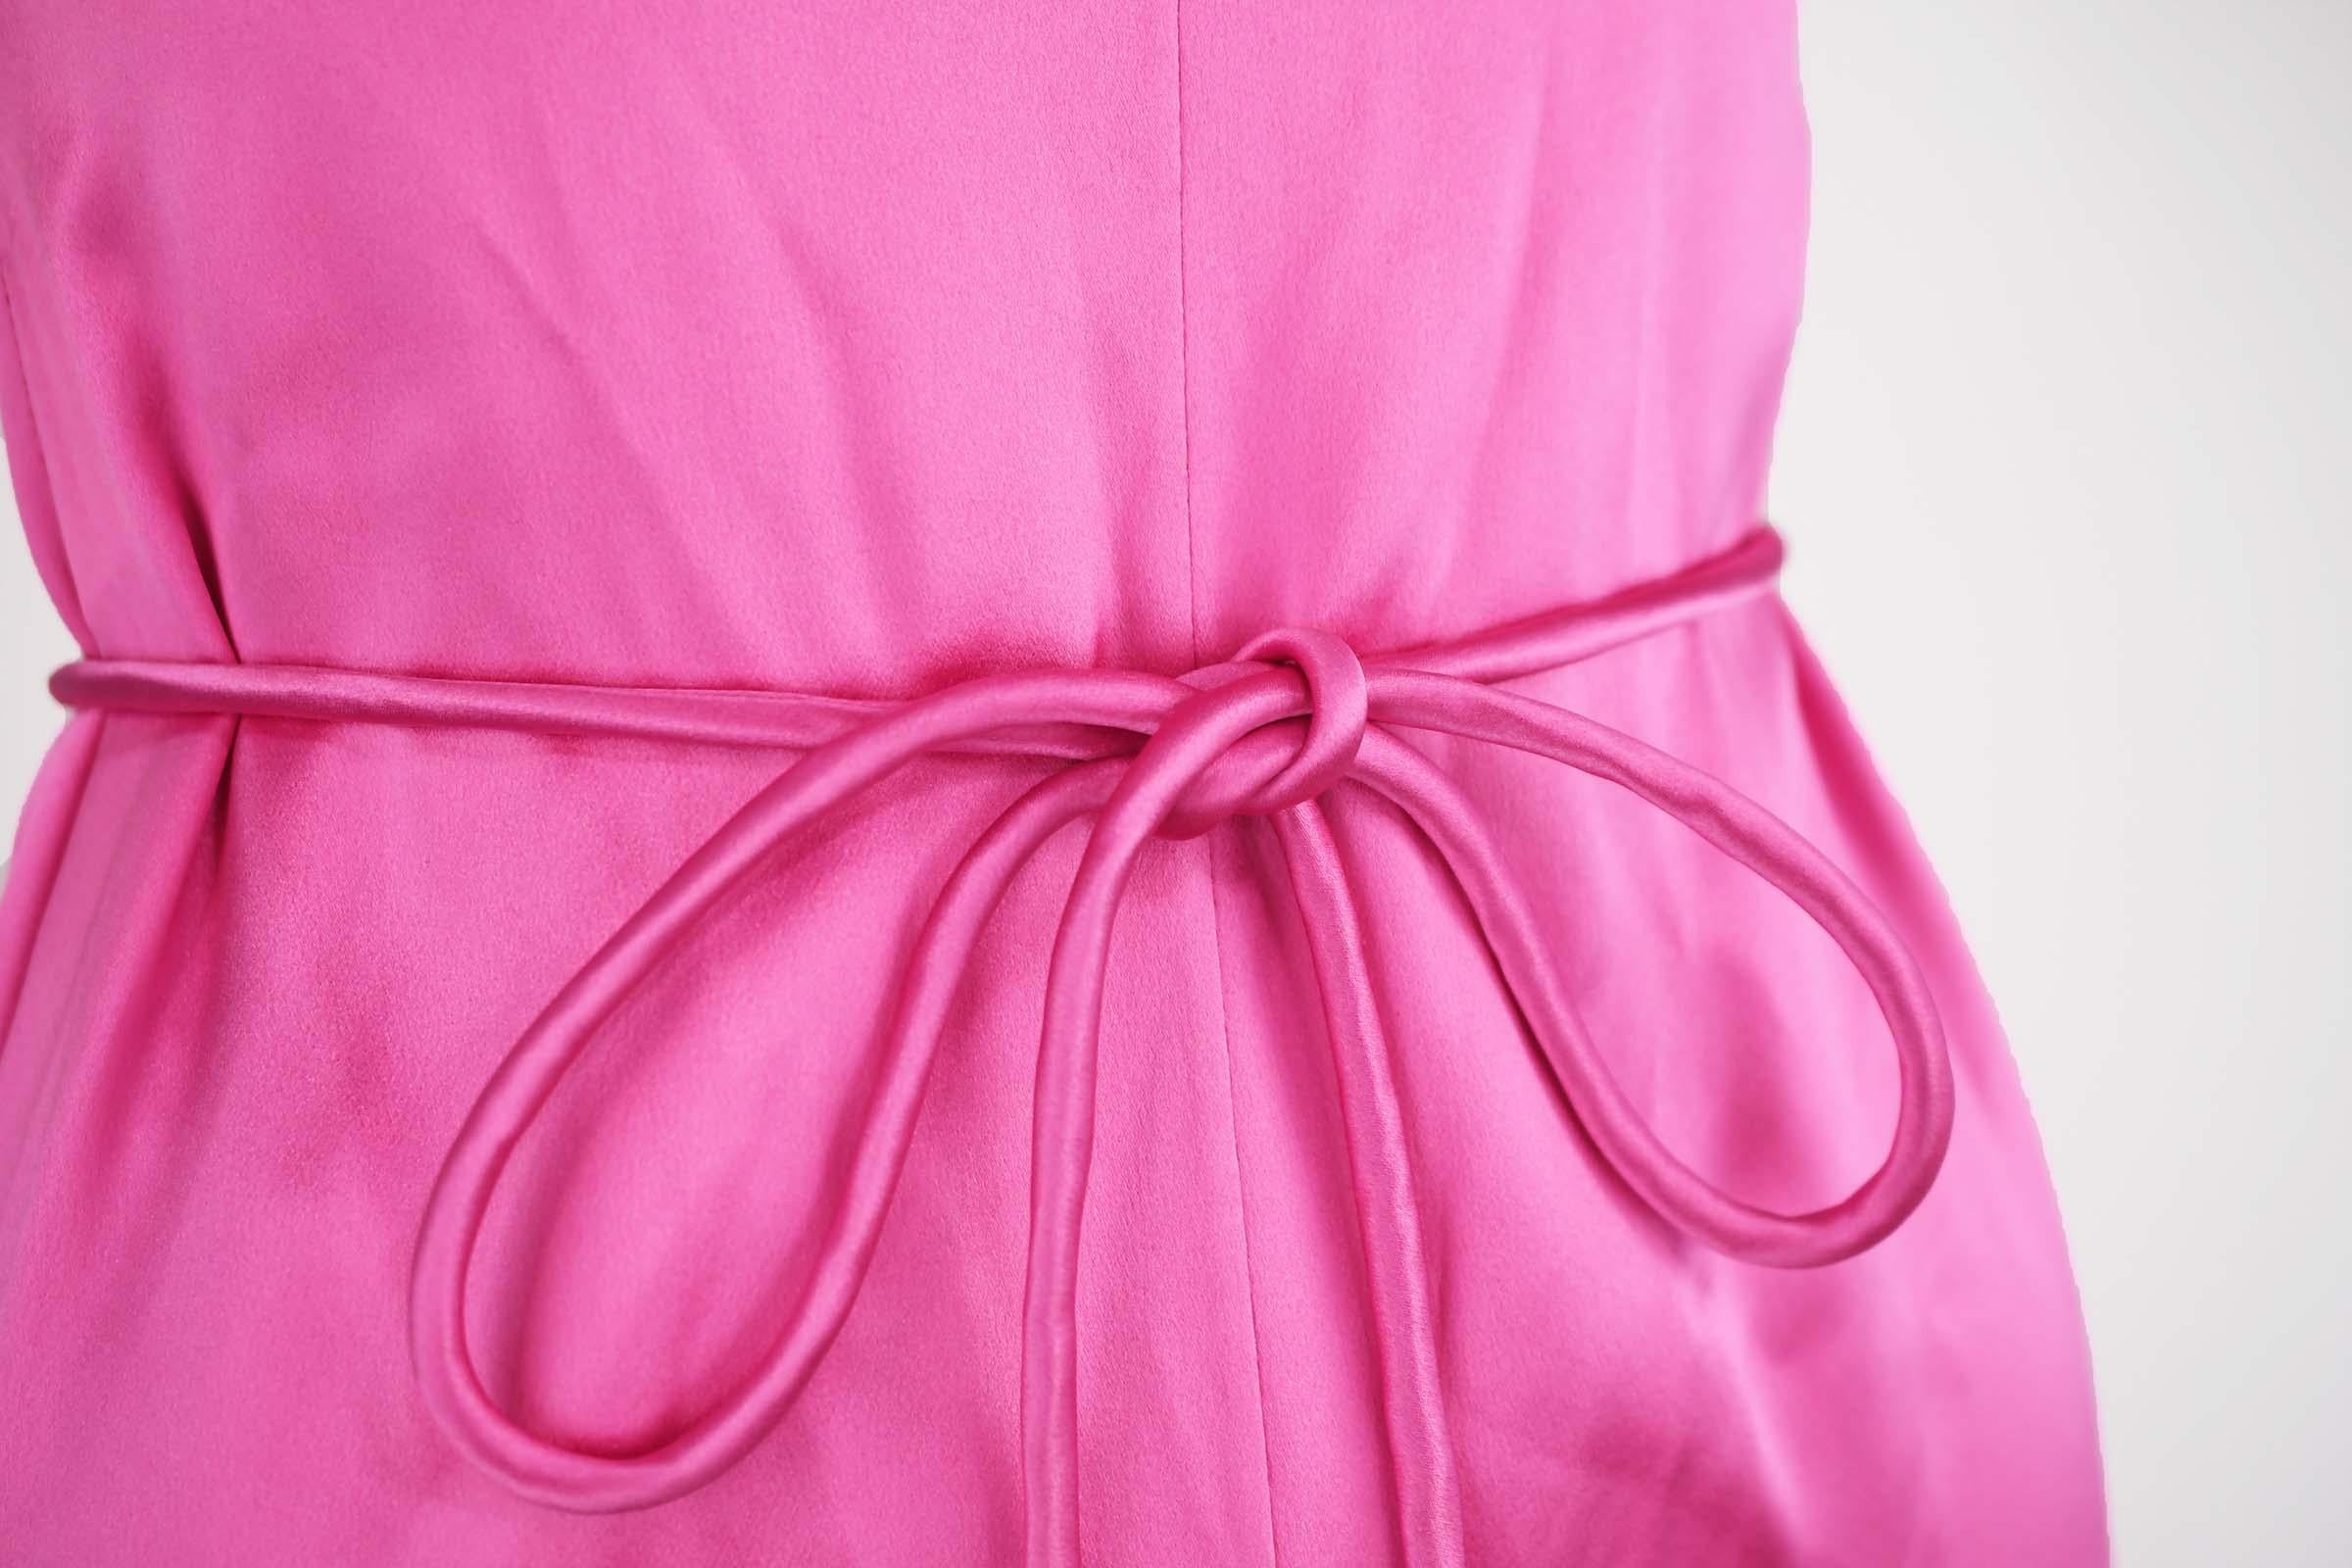 Vintage Valentino Pink Charmeuse Gown - Size 4 For Sale 1